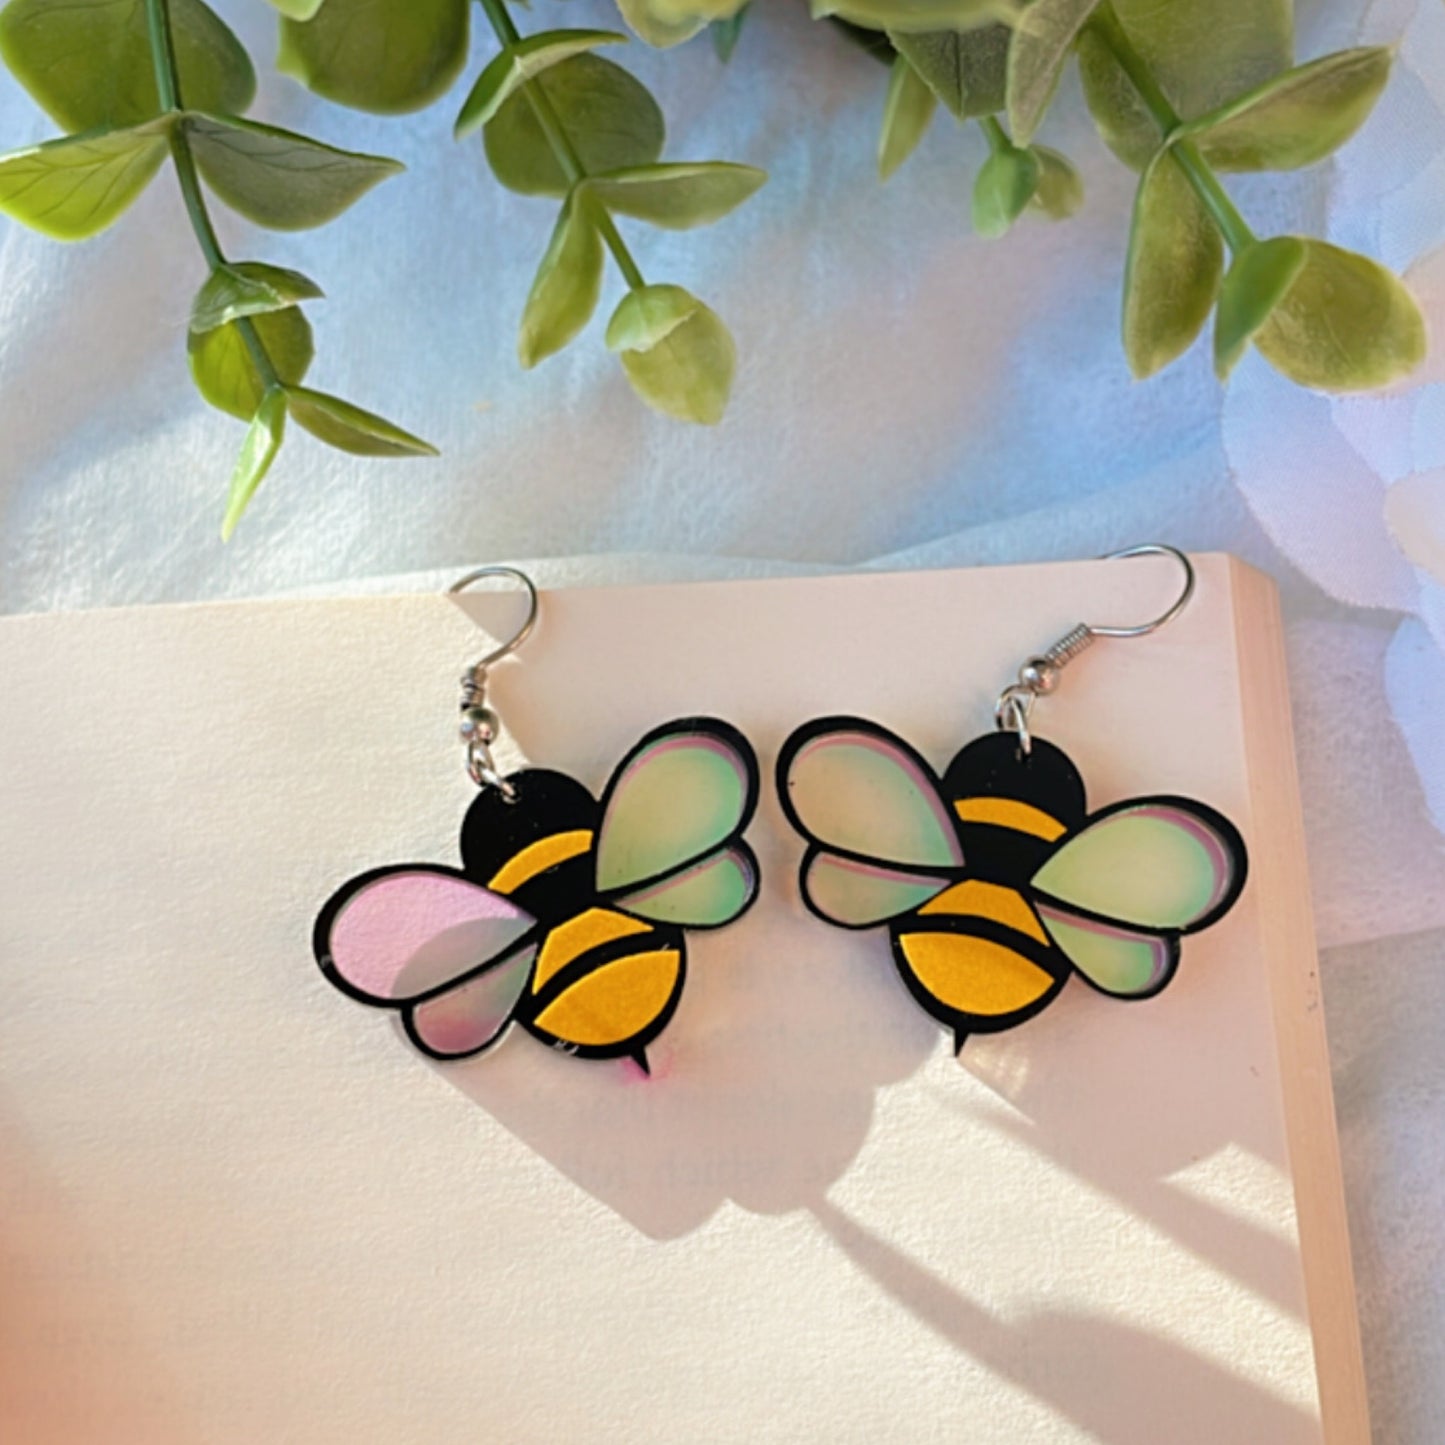 Baby Bee Earrings - Nian by Nidhi - placed in a white and green background